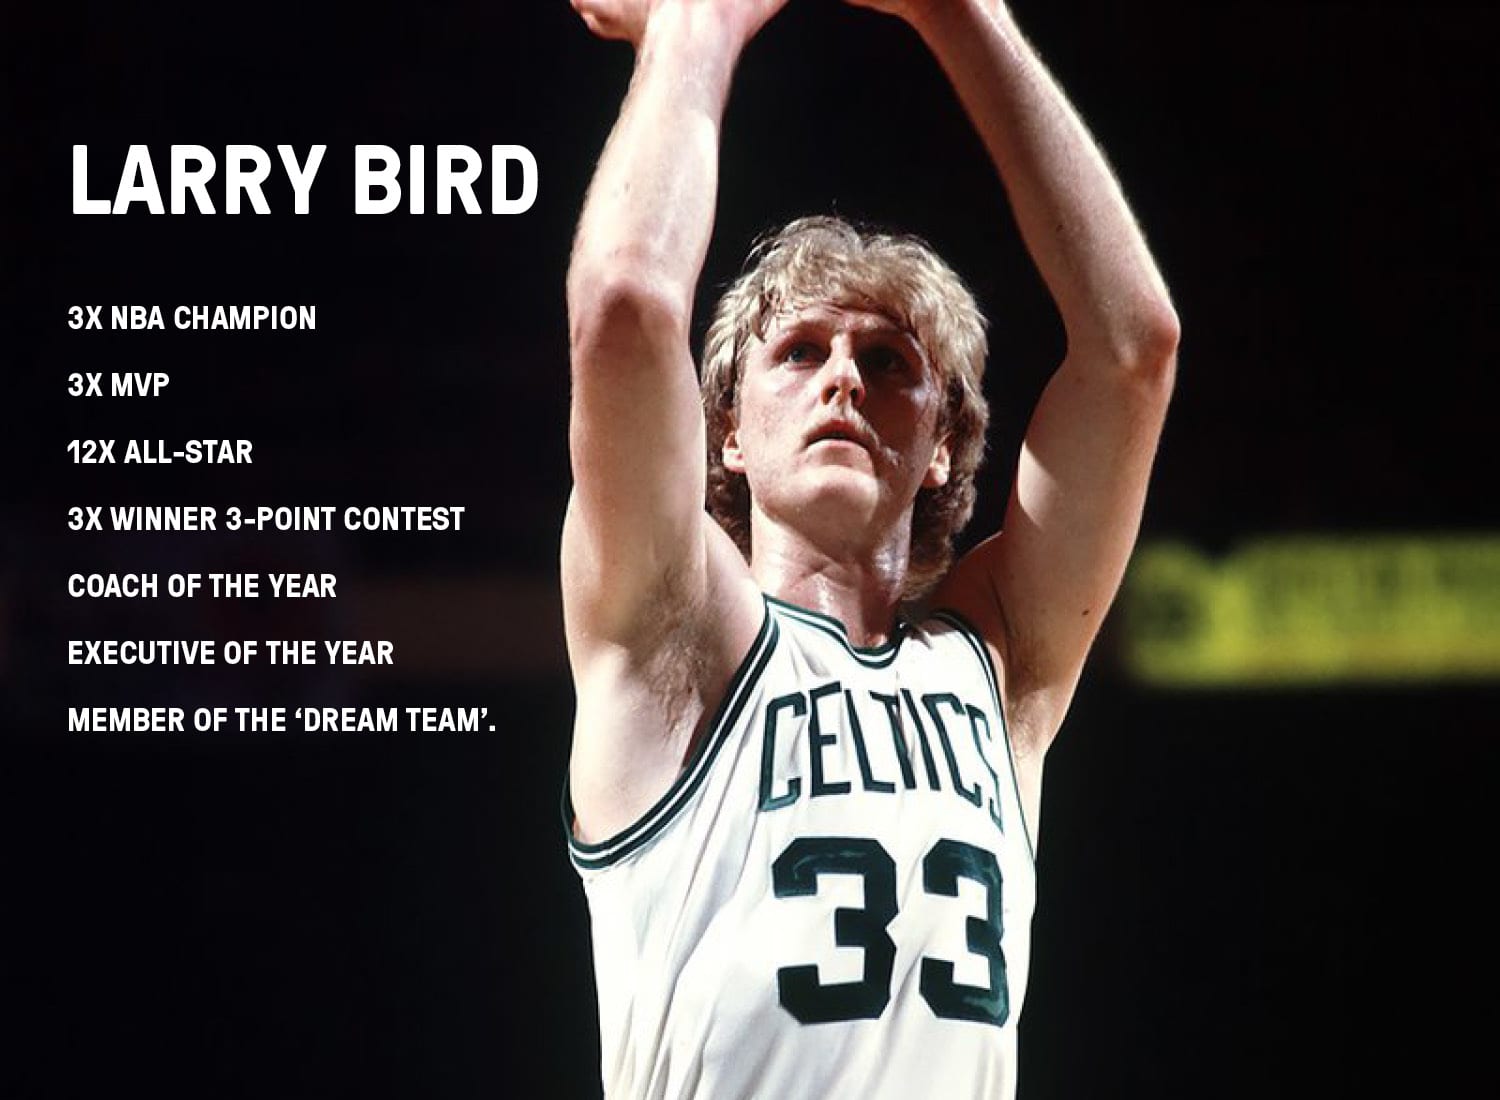 How many NBA championships did Larry Bird win as a player?